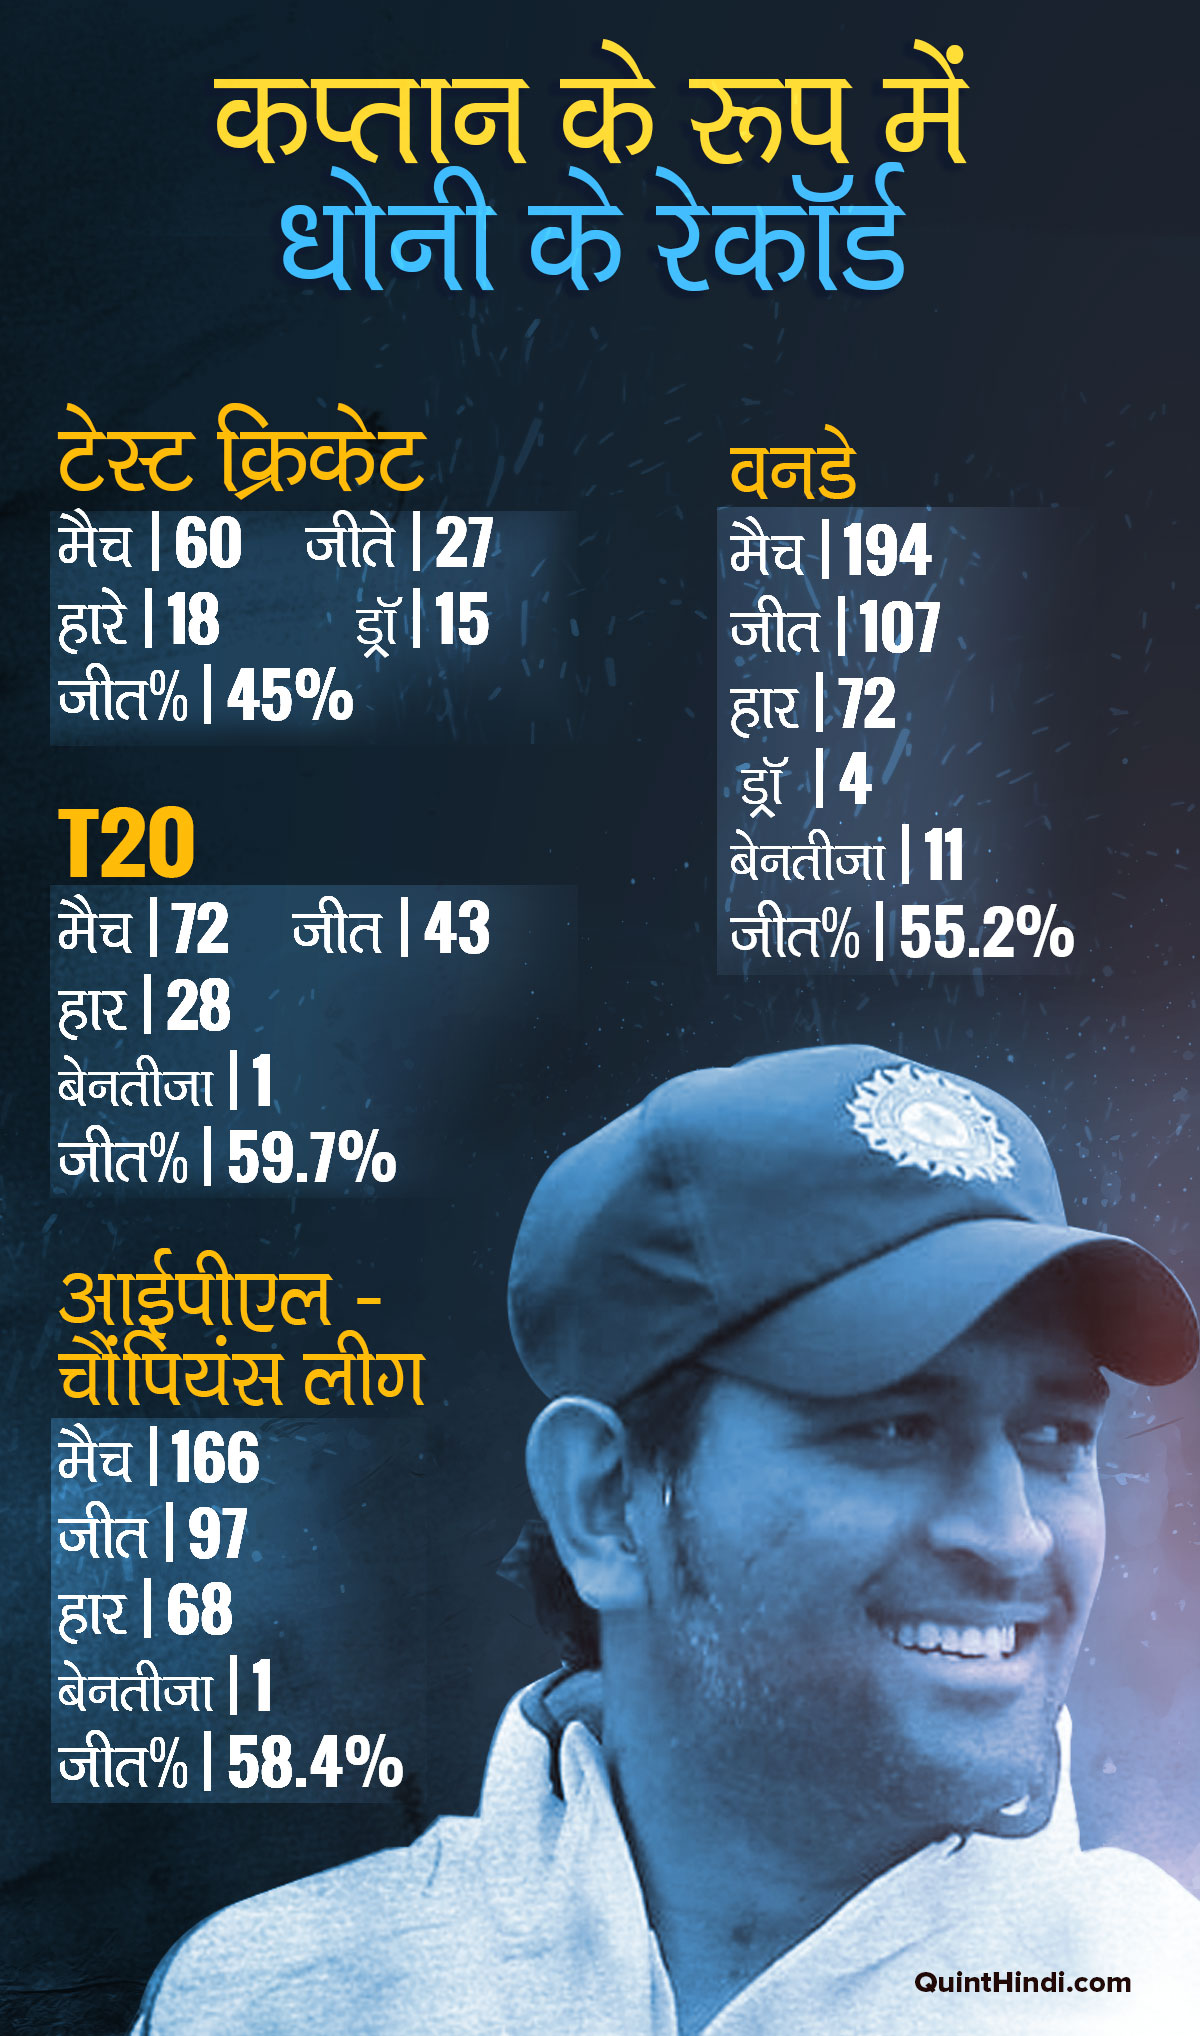 MS dhoni's record as captain